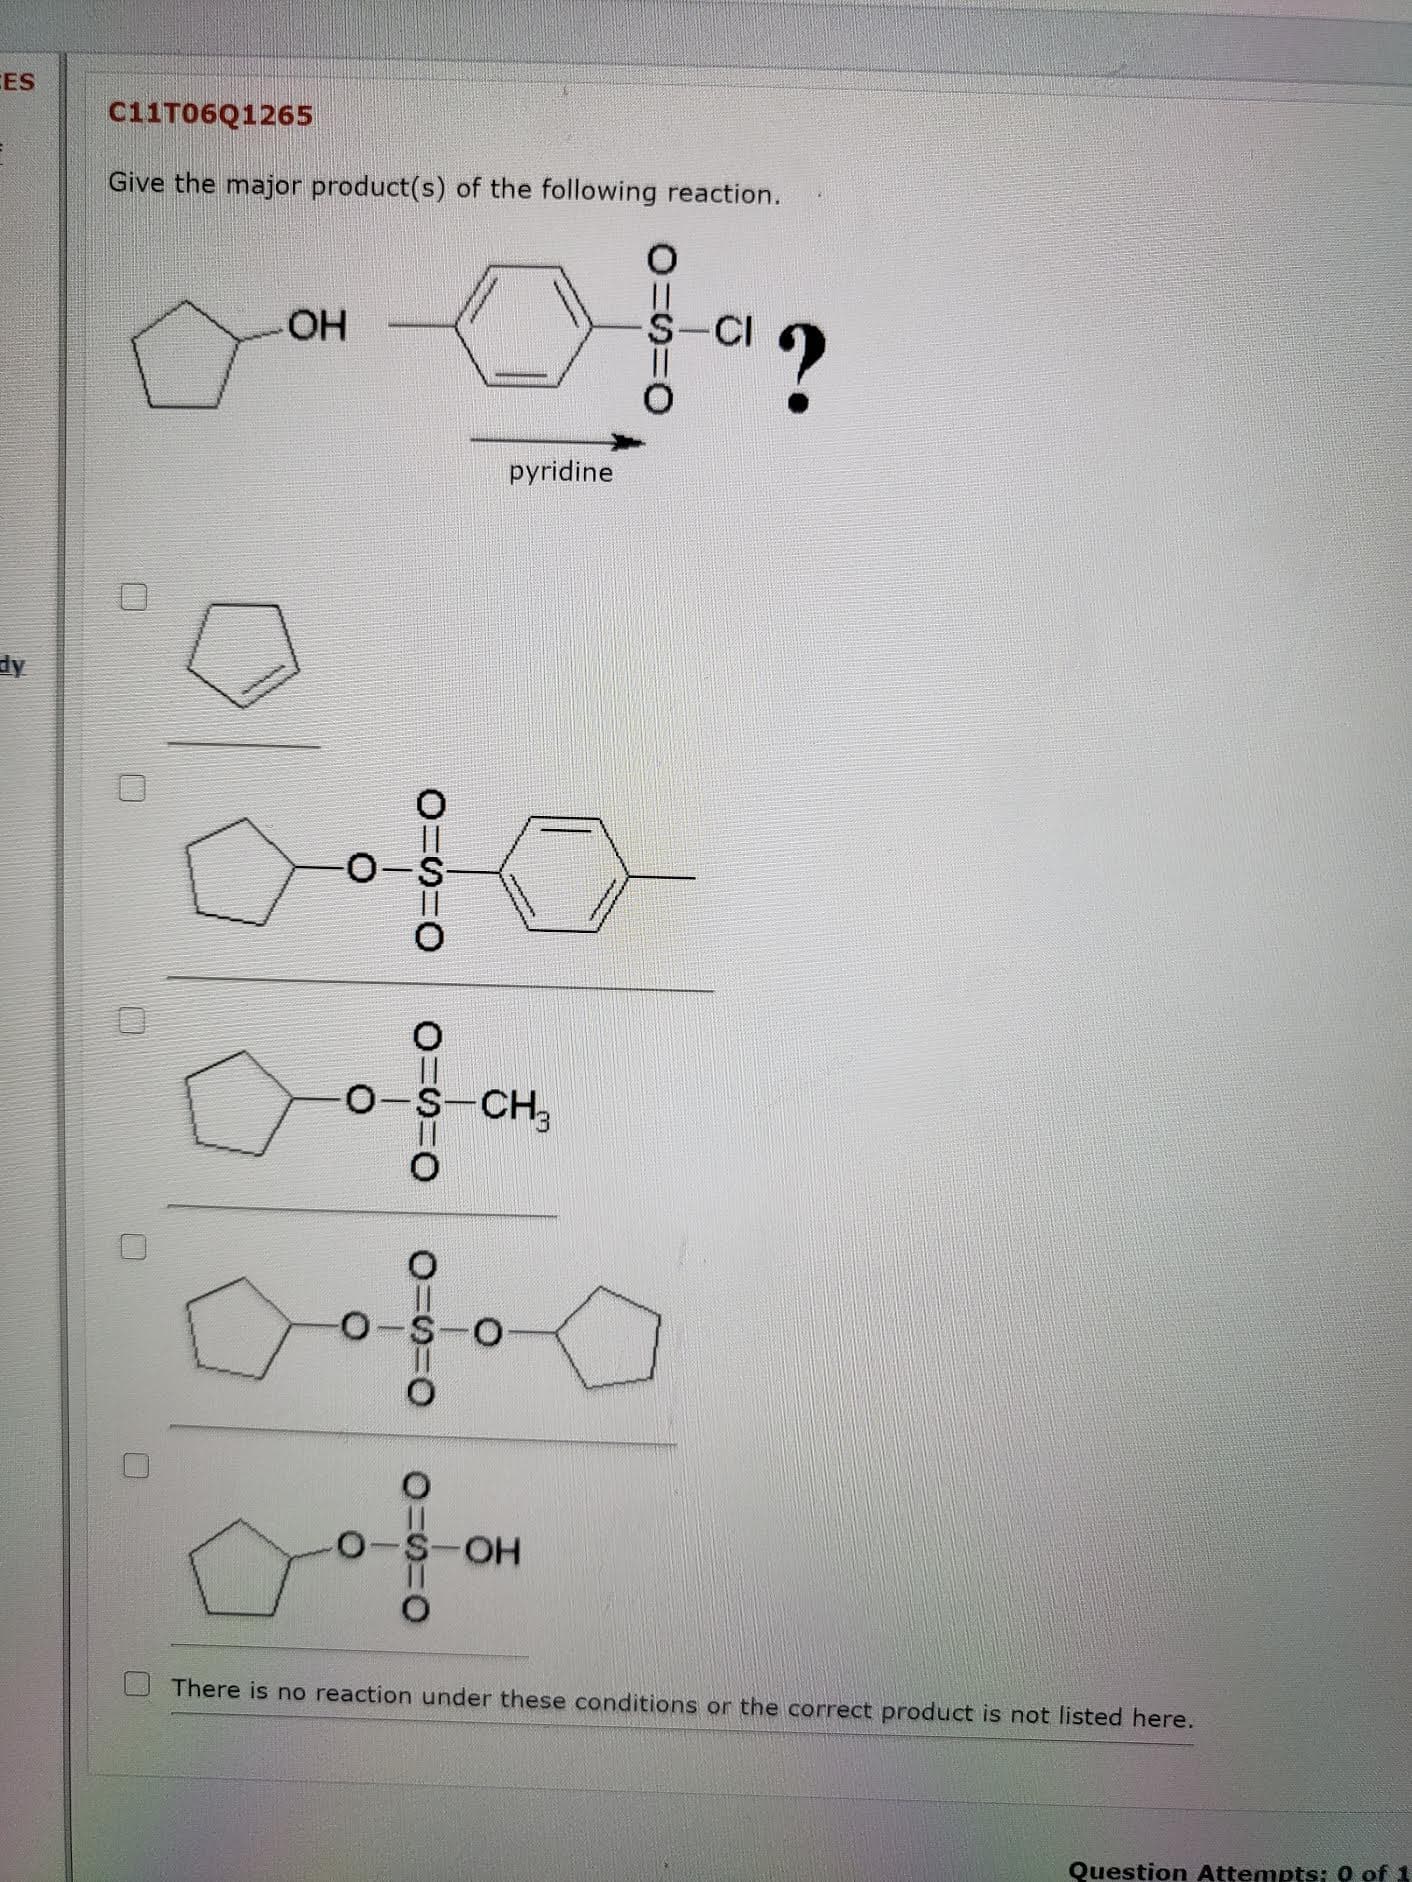 Give the major product(s) of the following reaction.
HO-
S-CI
pyridine
0-S
0-S-CH,
O-
HO-
There is no reaction under these conditions or the correct product is not listed here.
